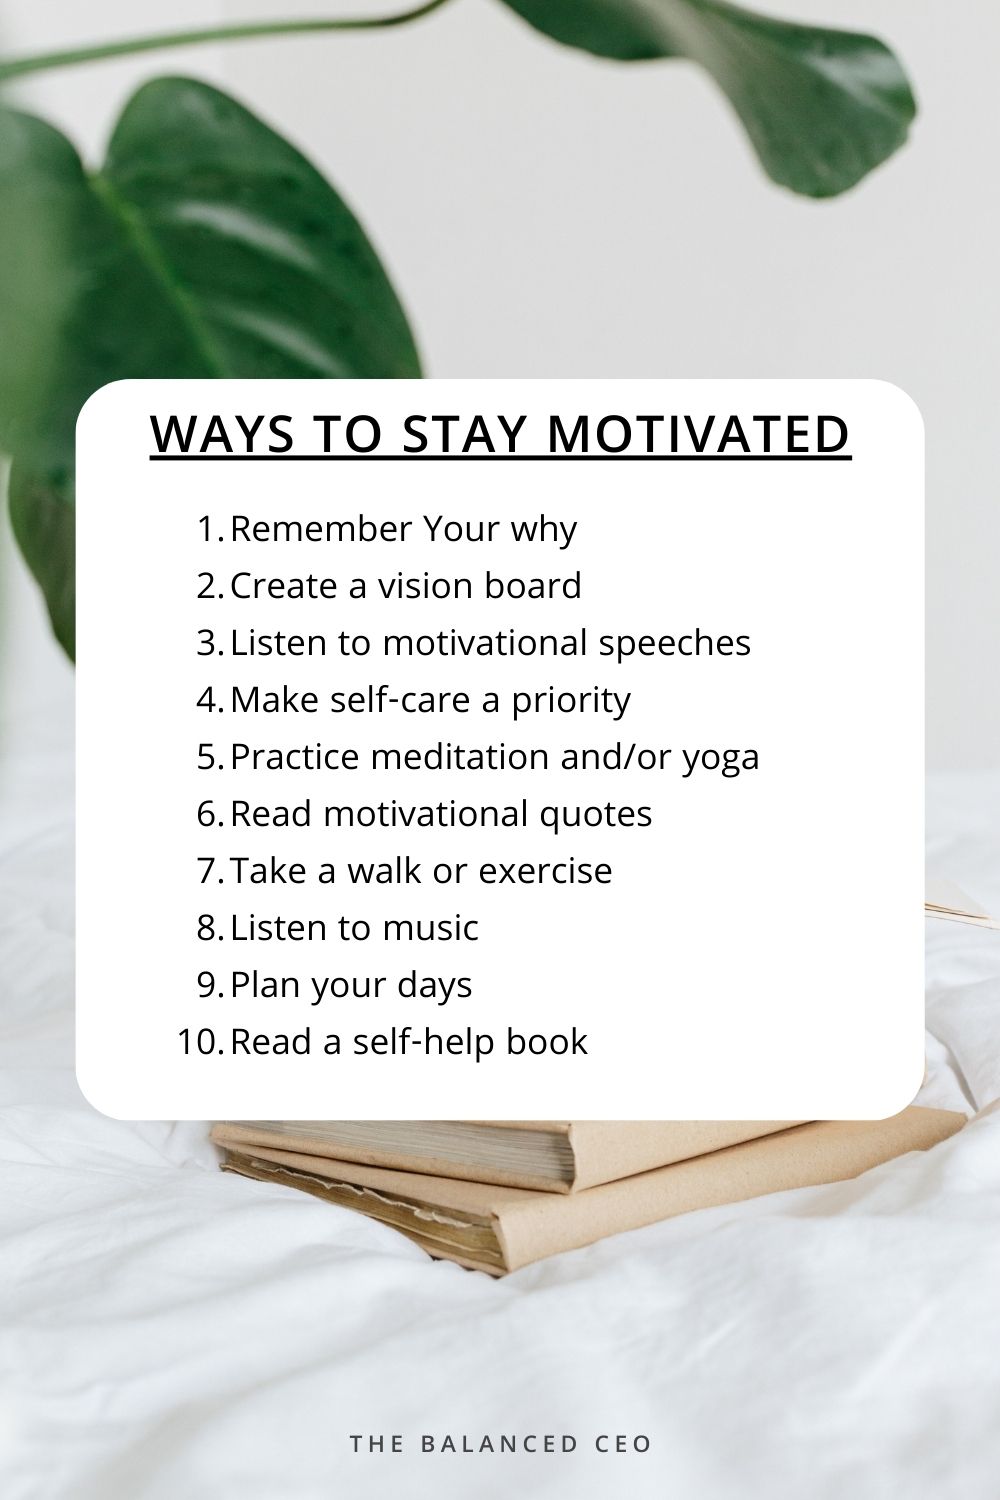 10 Ways to Stay Motivated & Focused in Life